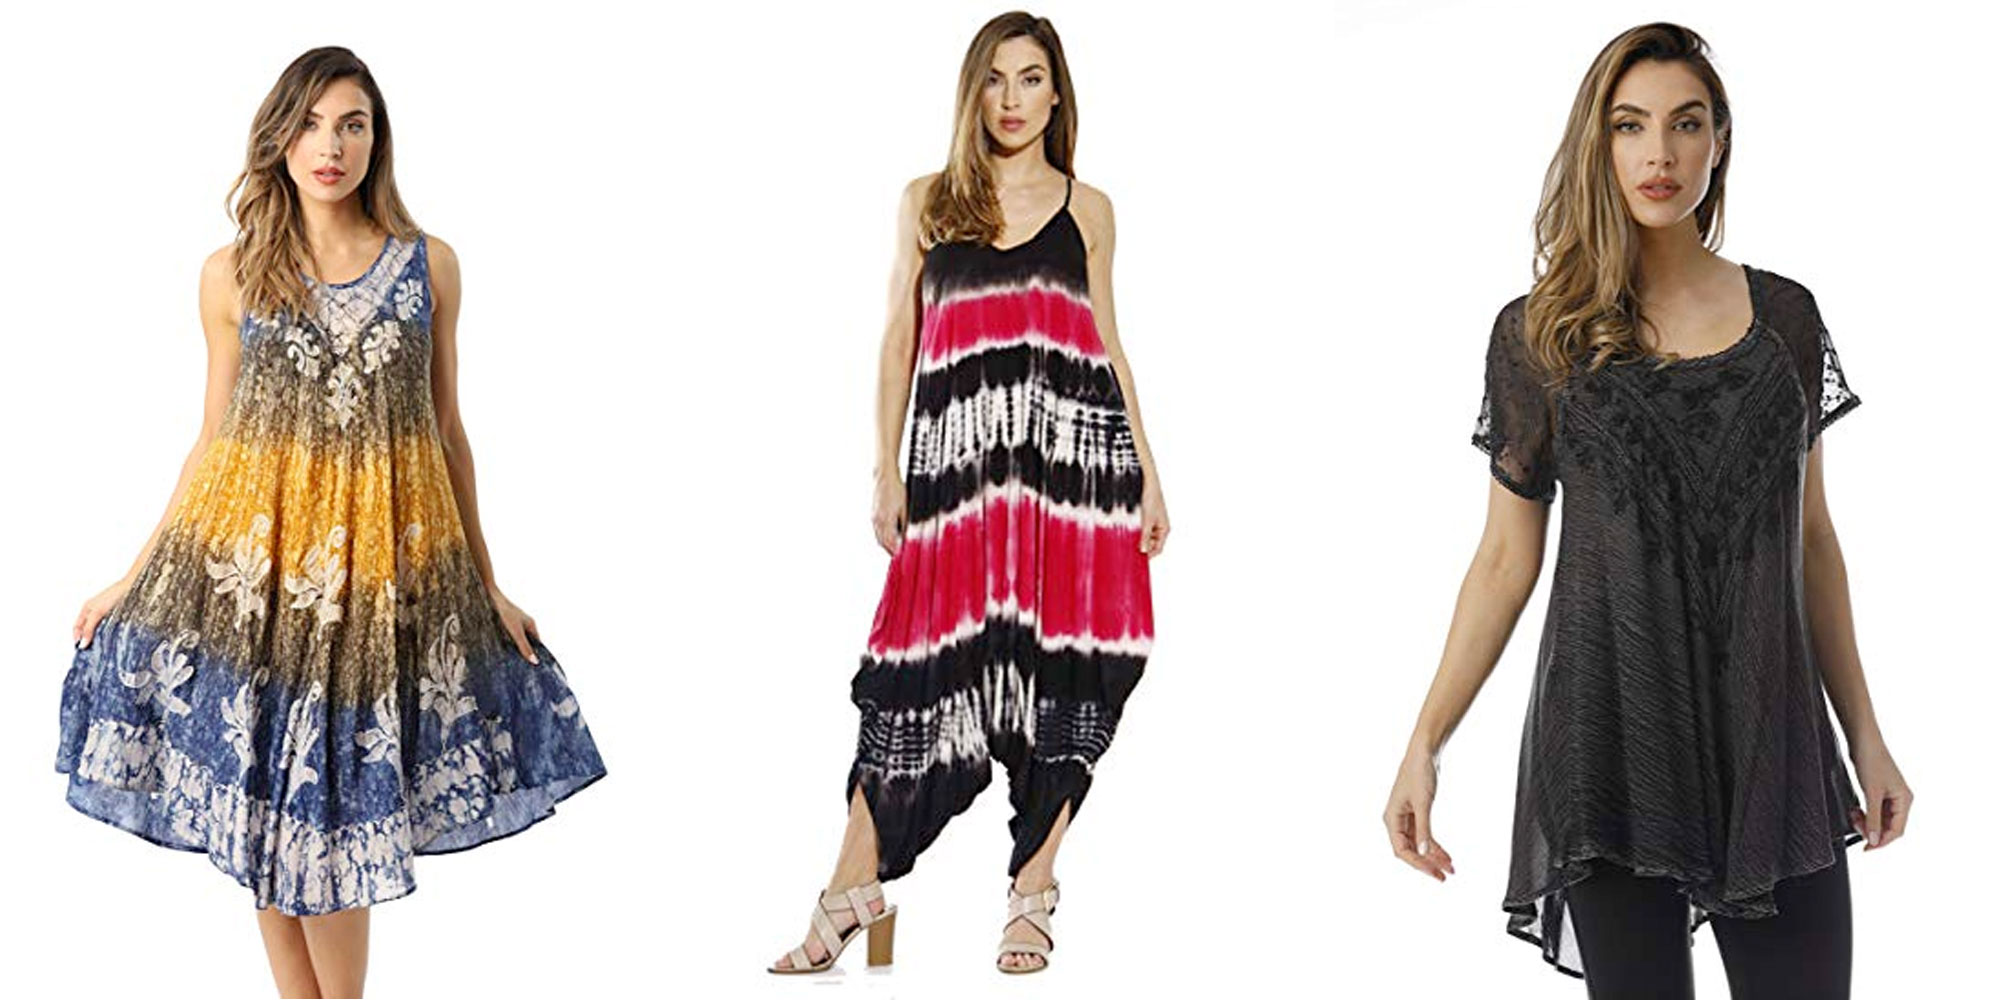 Stay fashionable this summer w/ Riviera Sun Summer Clothing from $15 at ...